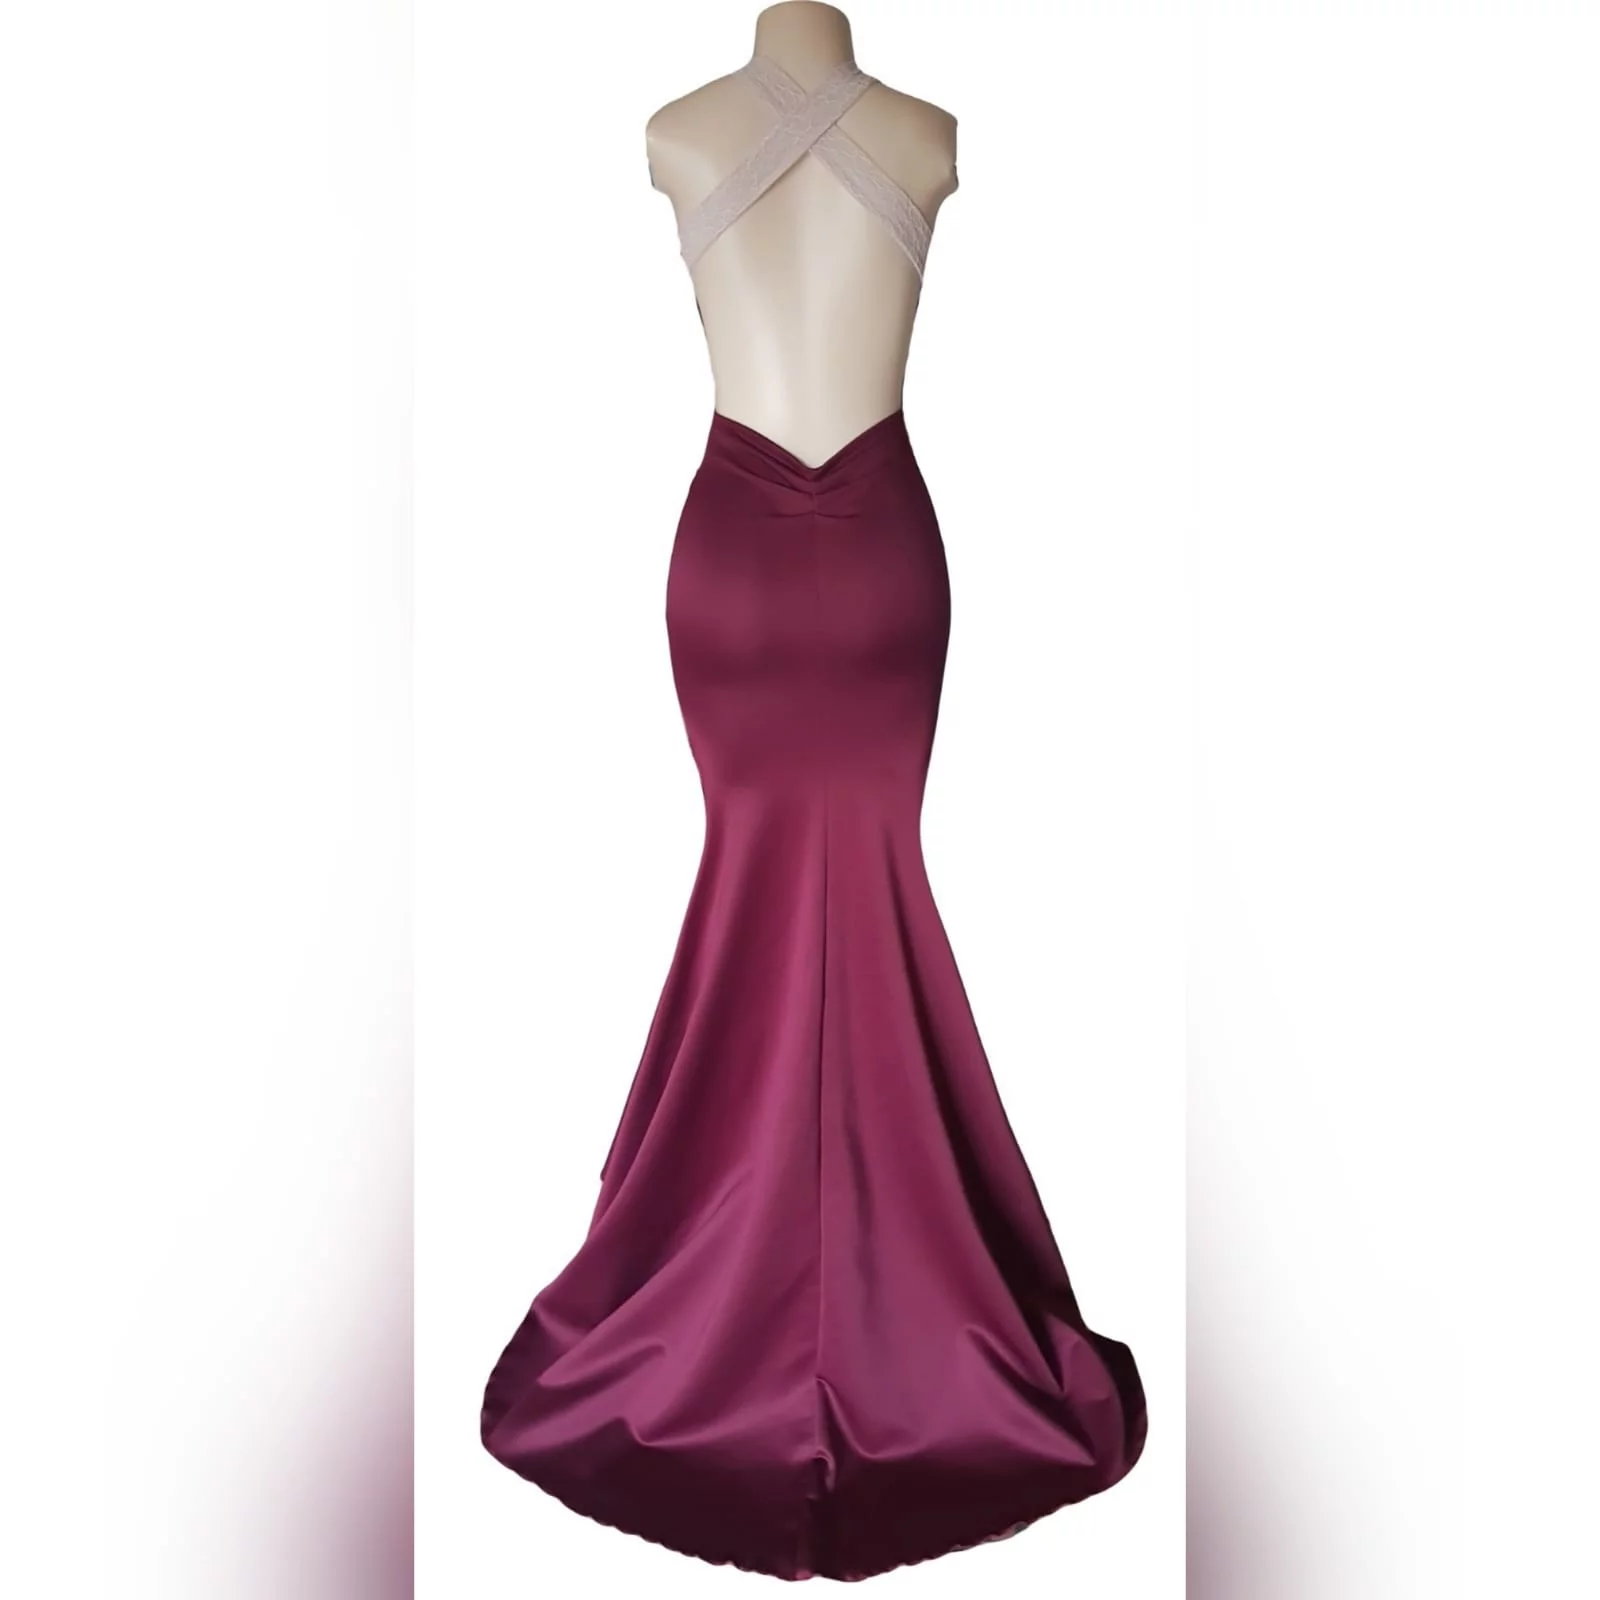 Simple elegant soft mermaid maroon prom dress 4 <blockquote>"you were born to stand out, stop trying to fit in". Roy t. Bennett</blockquote> simple elegant soft mermaid matric prom dress with an overlayer of cream lace on the bodice to add a unique touch to the design. Plunging neckline, low open back and lace wide crossed shoulder straps. With a matching lipstick/cellphone bag